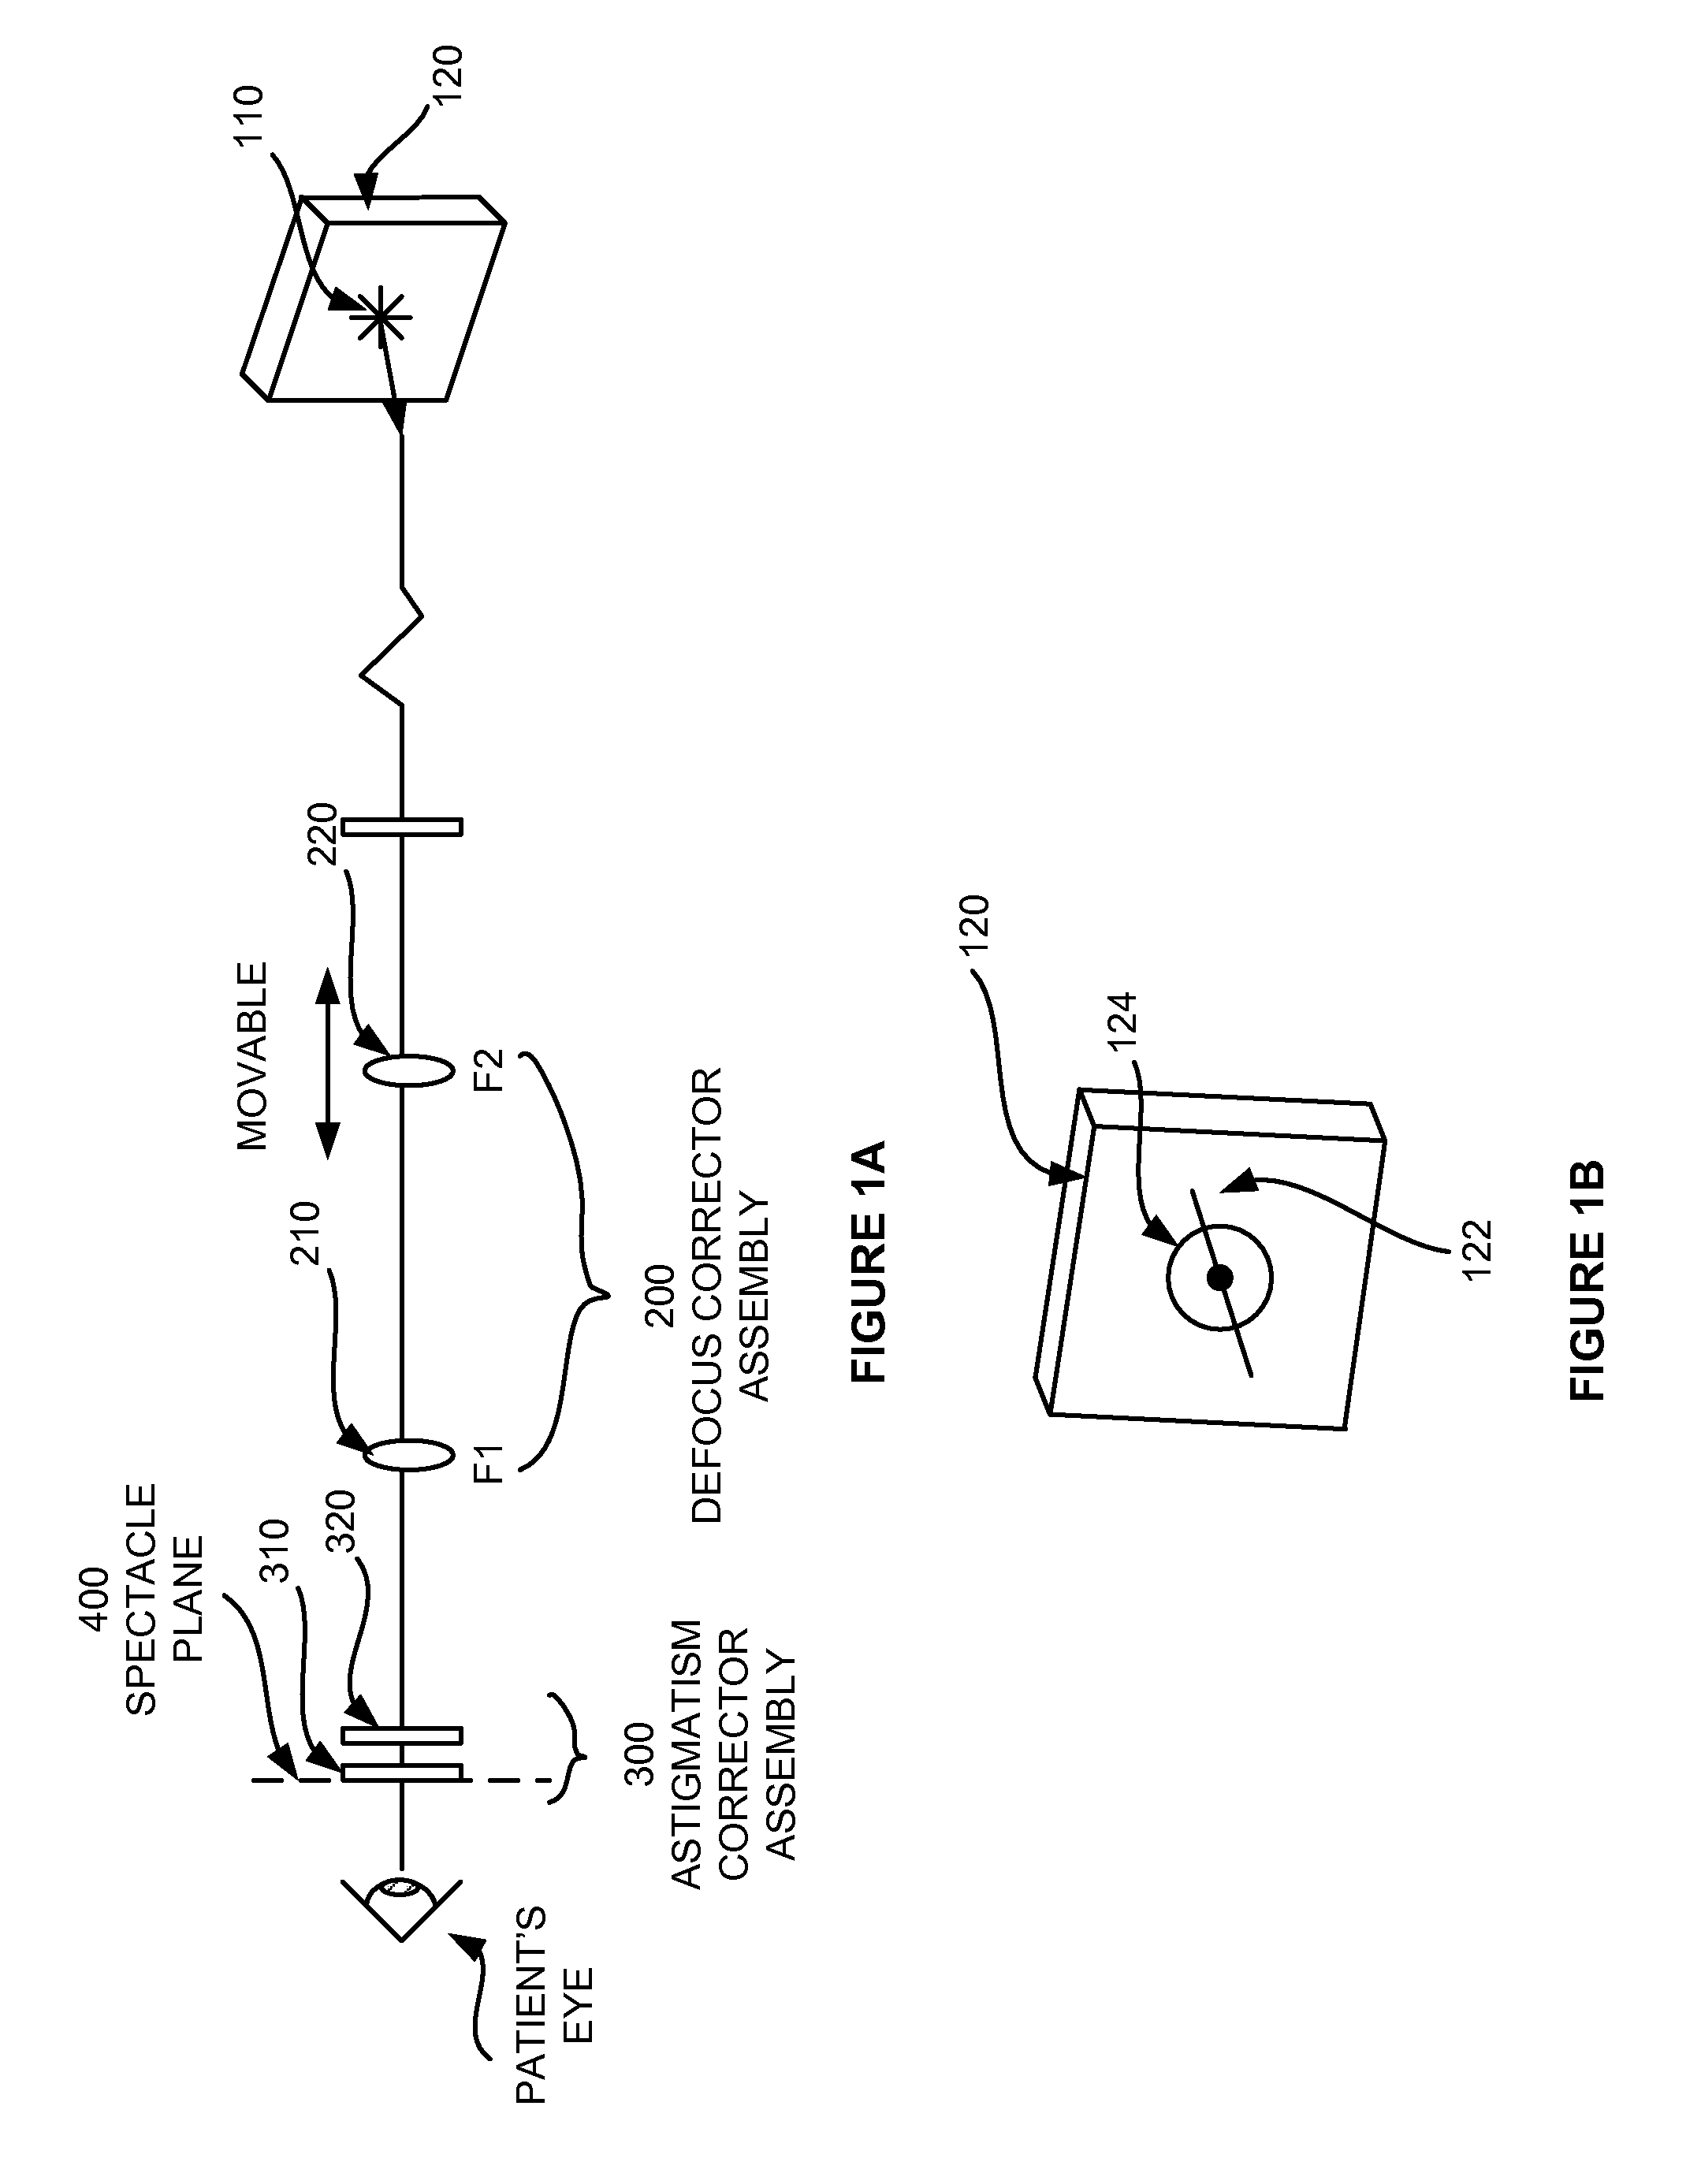 Subjective Refraction Method and Device for Correcting Low and Higher Order Aberrations